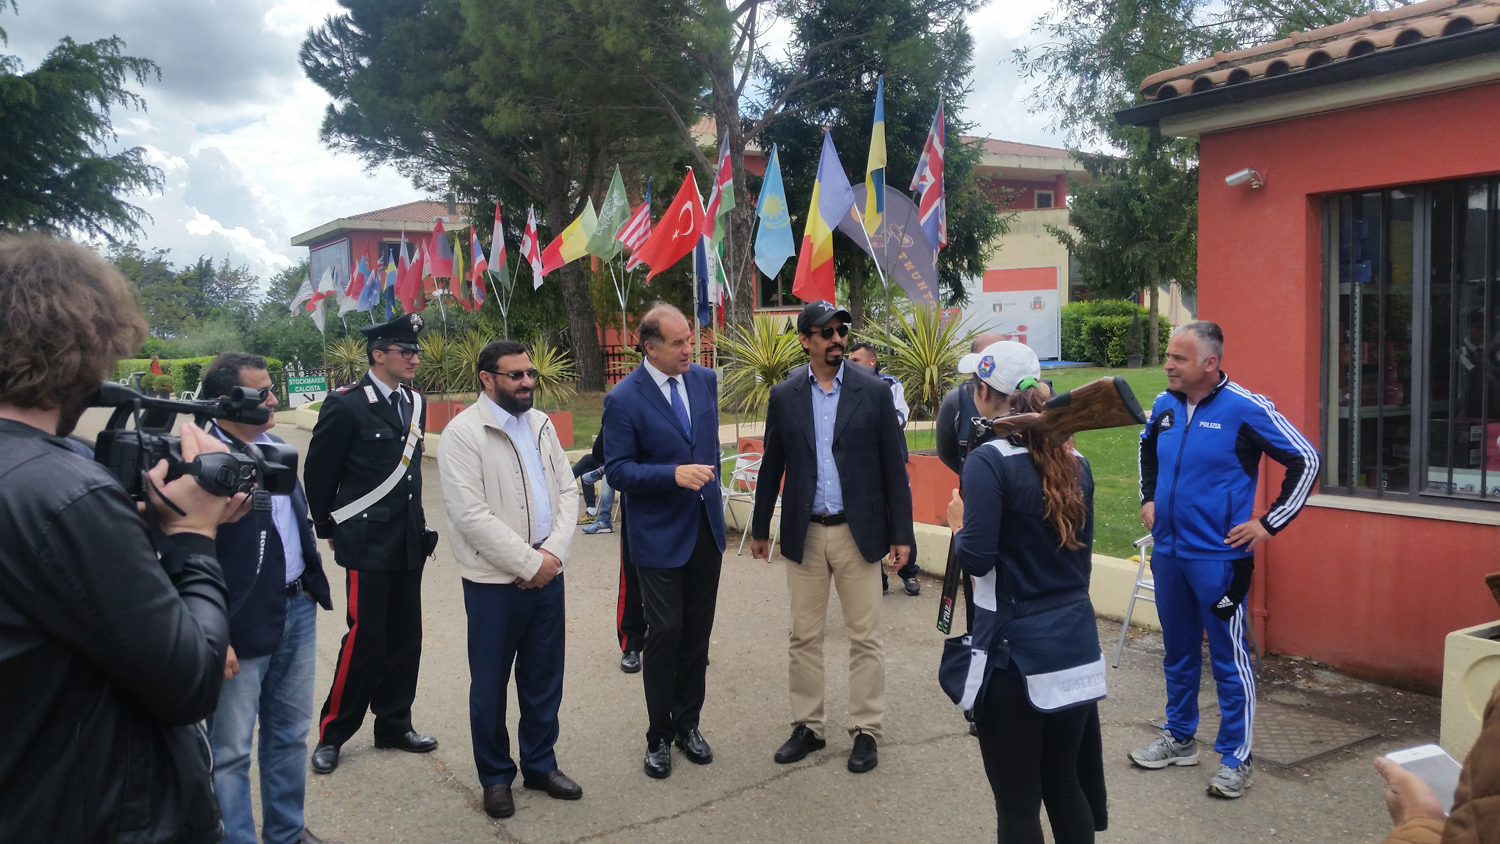 President of the Italian Shooting Federation Luciano Rossi and Kuwaiti Ambassador to Italy Sheikh Ali Al-Khaled Al-Sabah during visit to the team's training camp